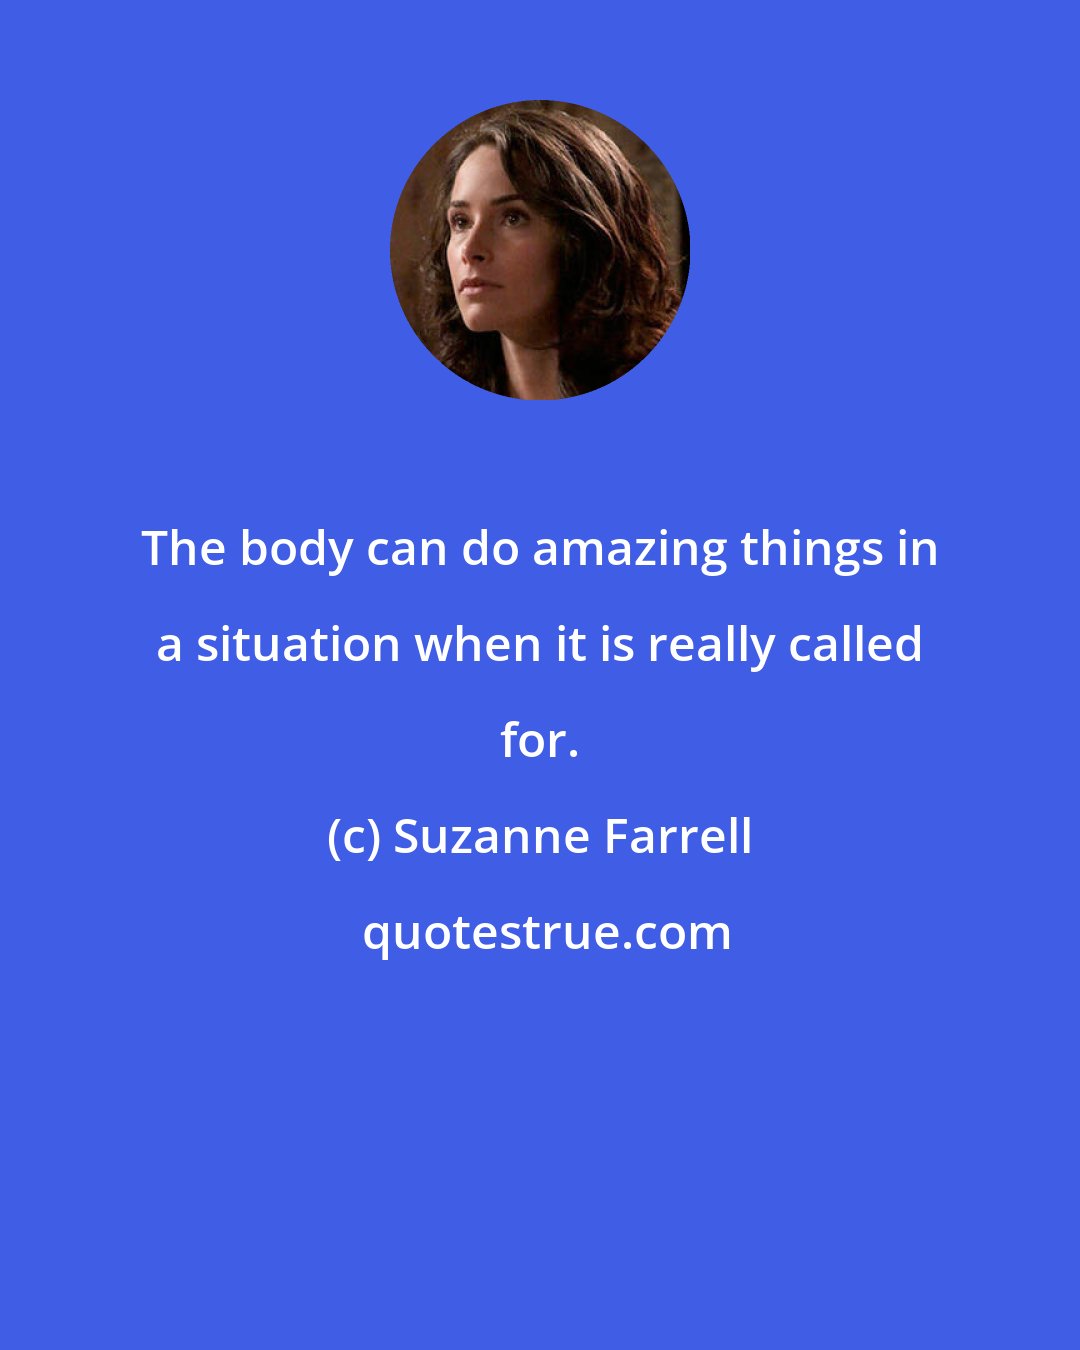 Suzanne Farrell: The body can do amazing things in a situation when it is really called for.